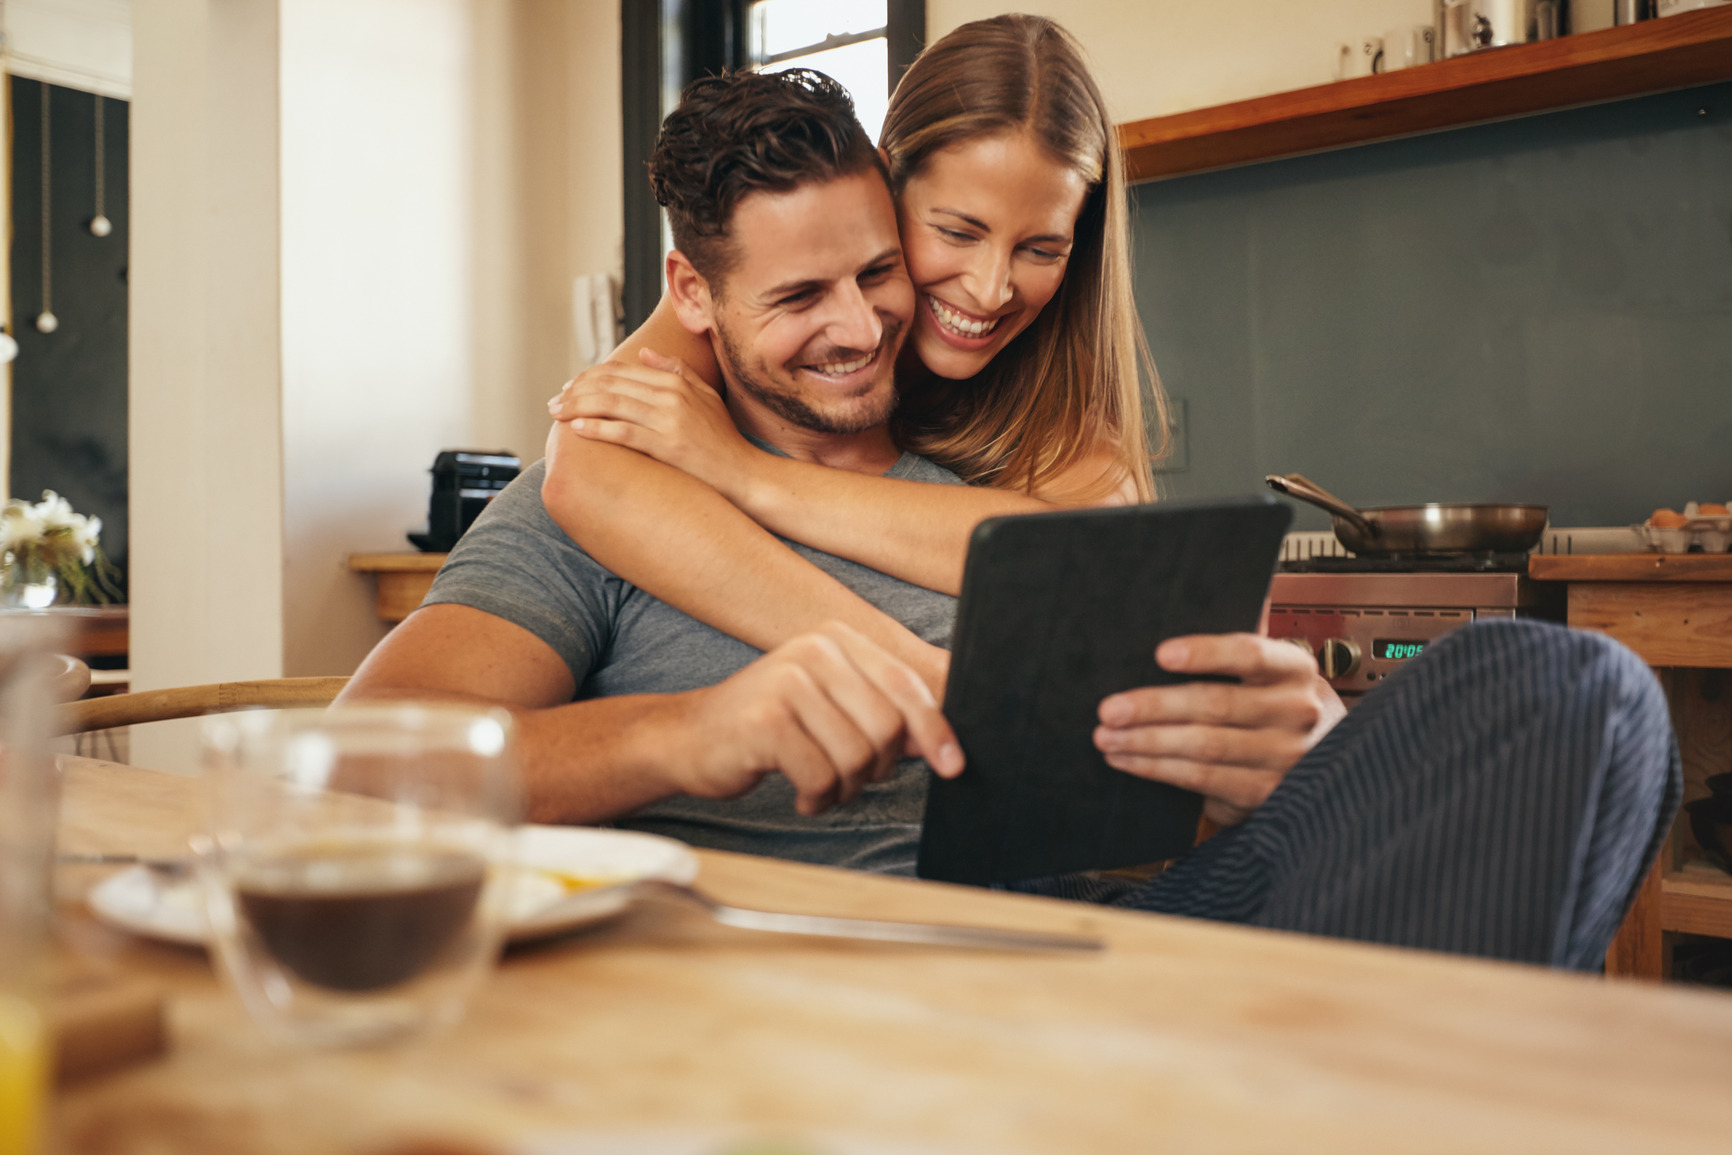 Couple smiling as they read a tablet computer together in morning in the kitchen. Young man and woman catching up on social media smiling. Woman hugging her boyfriend holding tablet PC.